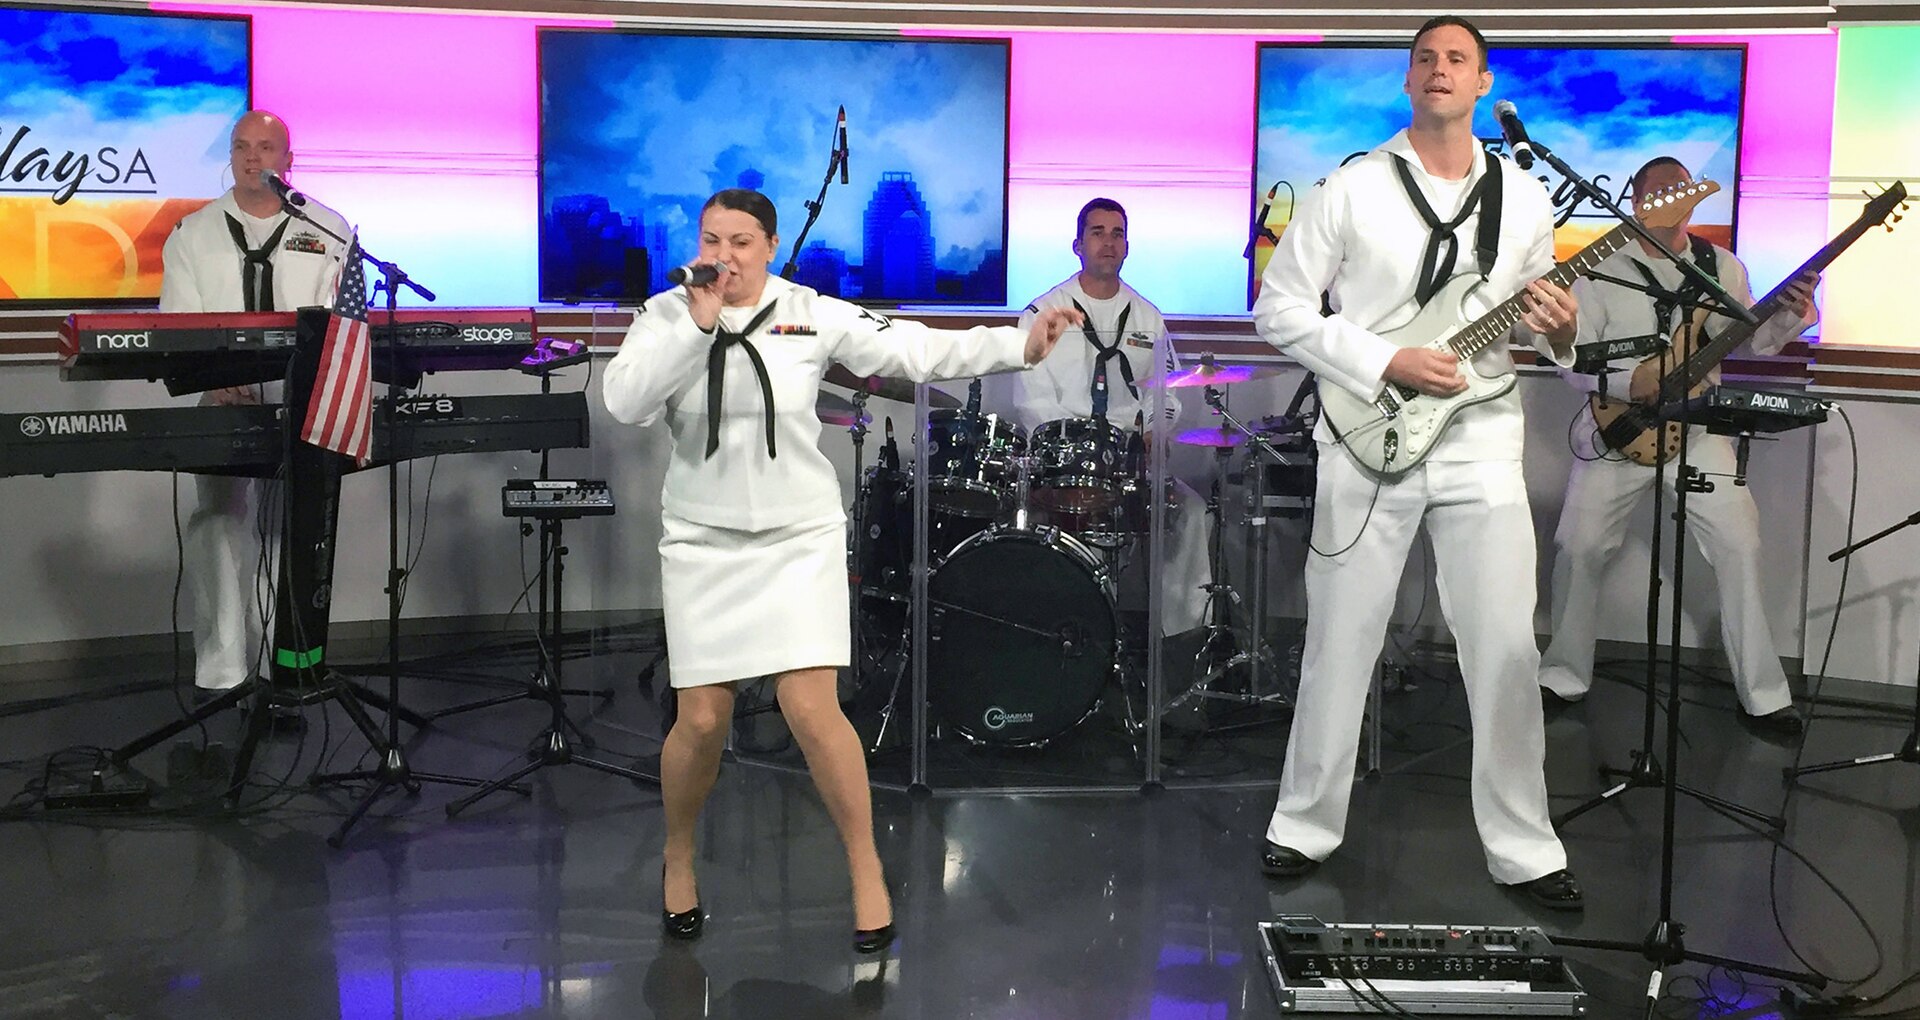 The “Destroyers”, the popular music group of Navy Band Southwest from San Diego, performs on KENS 5's Great Day SA Morning Show during Fiesta San Antonio 2017.  The “Destroyers” are in the city to conduct community outreach and spread Navy Awareness as part of Fiesta festivities.